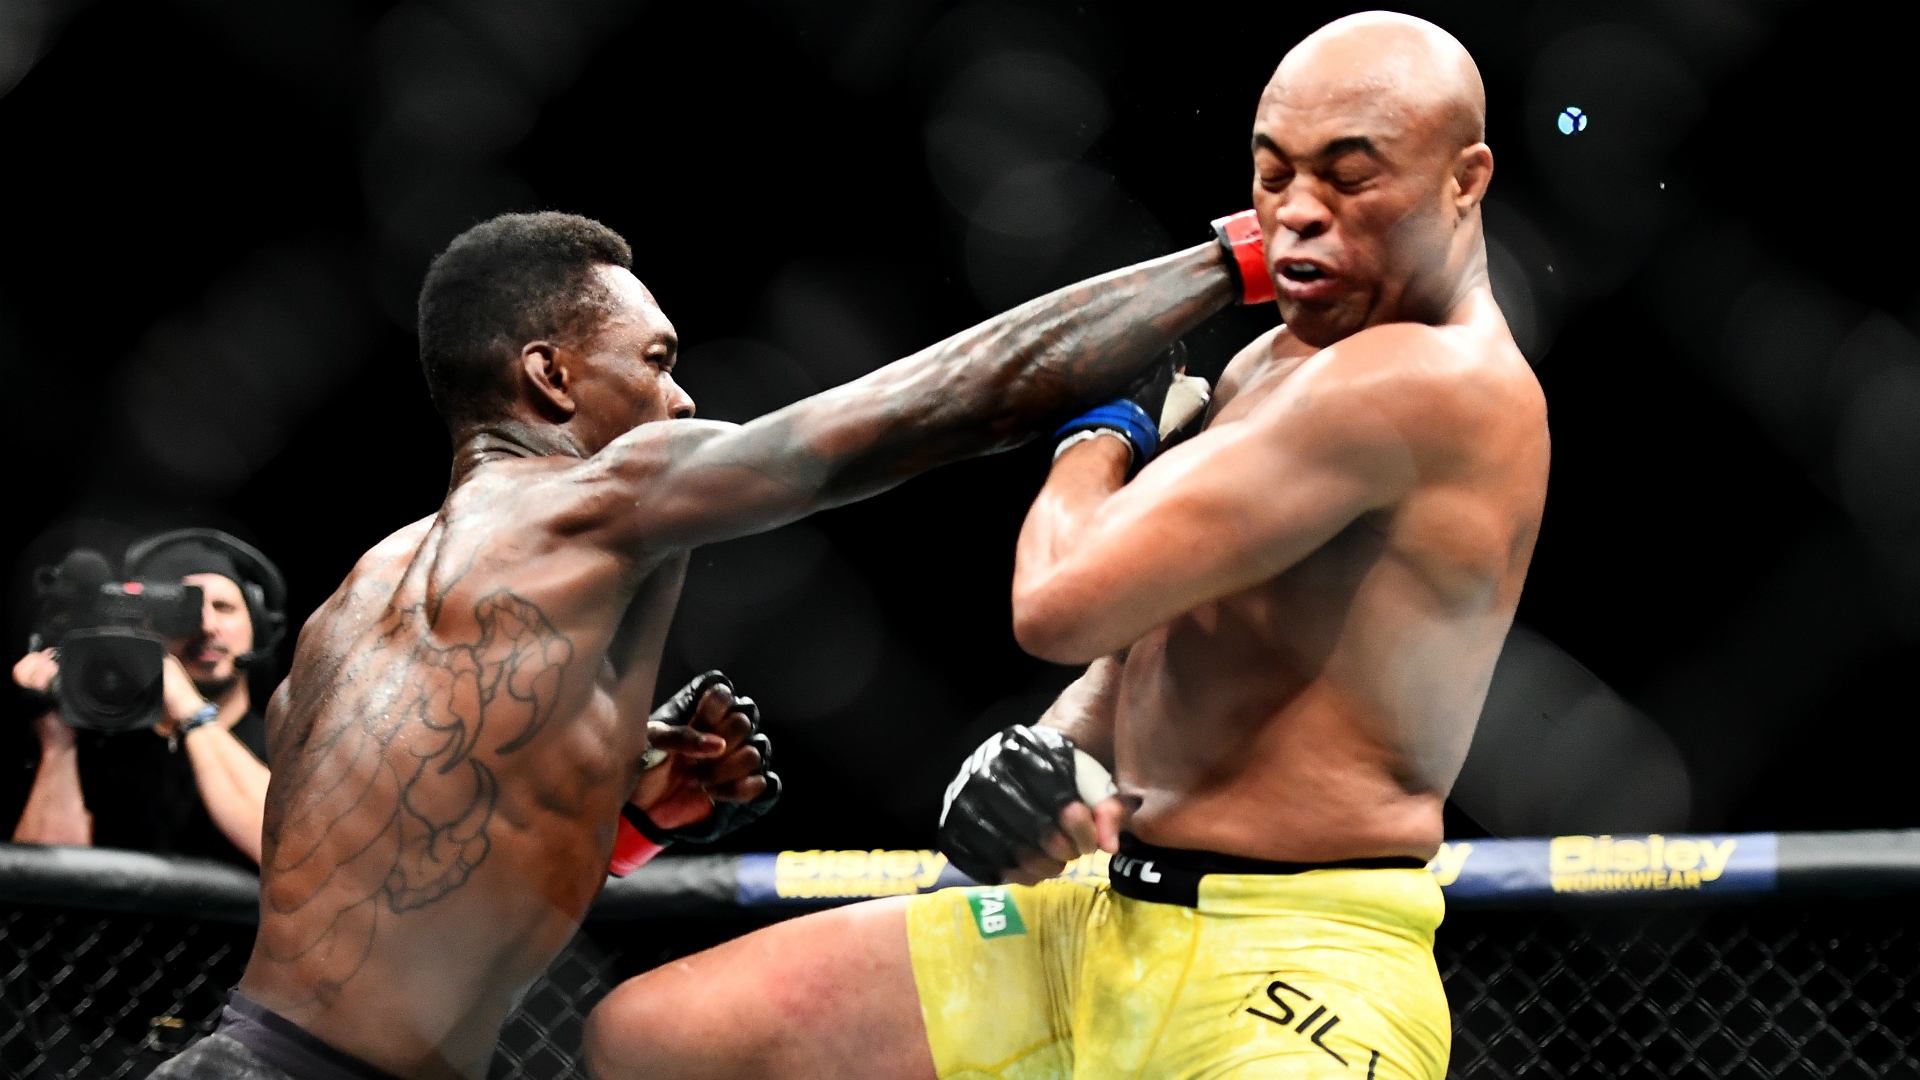 Israel Adesanya Lands A Blow To The Head Of Anderson - Israel Adesanya Vs Anderson Silva , HD Wallpaper & Backgrounds